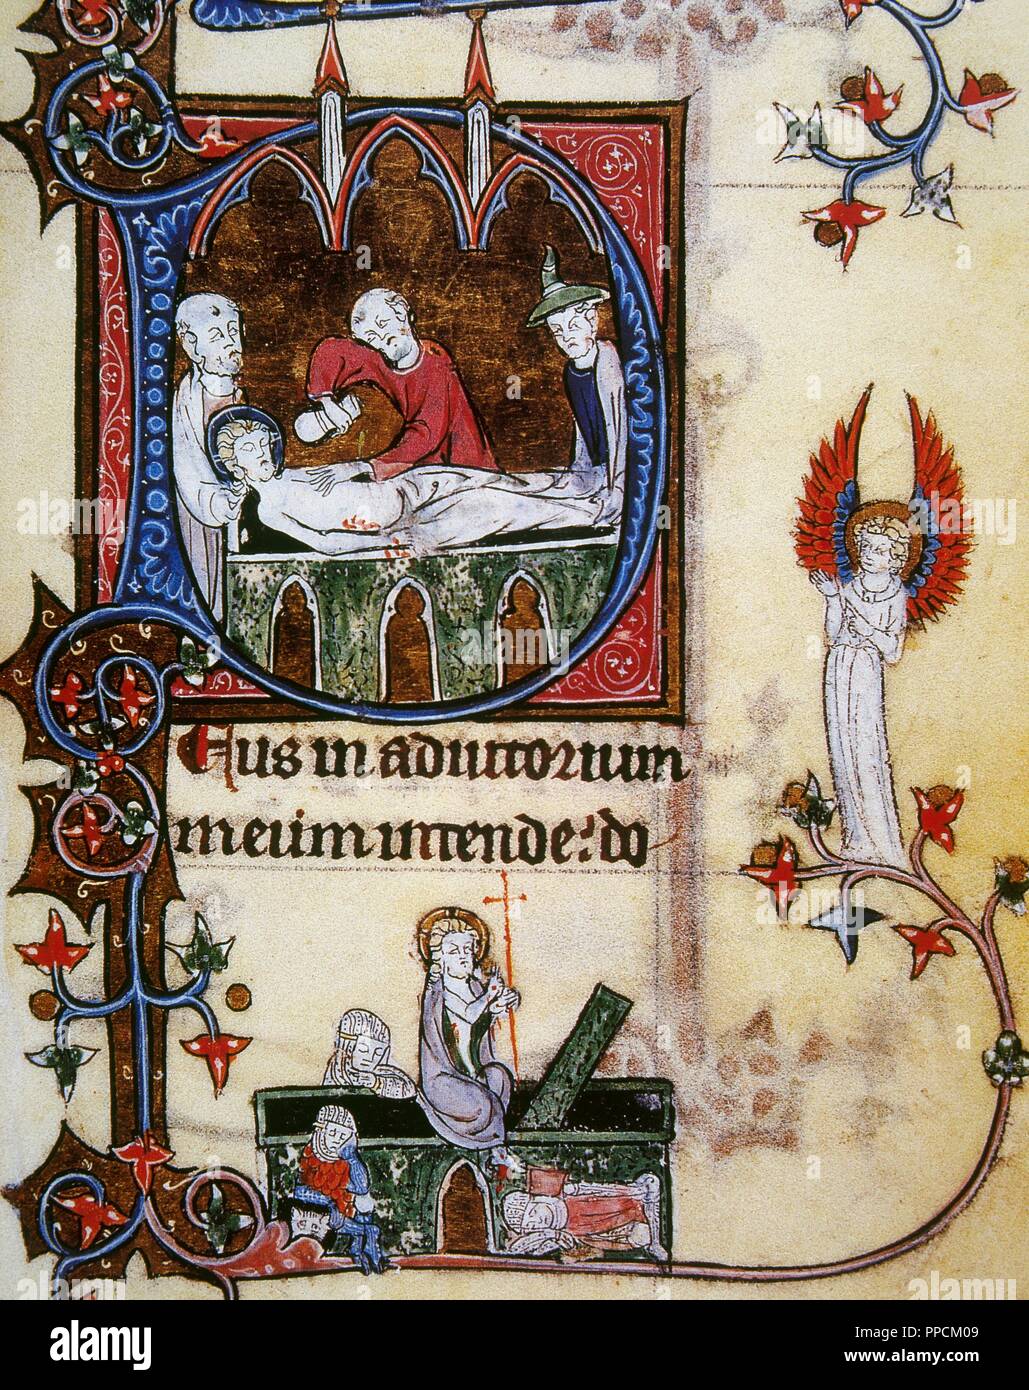 Burial and resurrection of Christ. Book of hours. 15th century. Conde Museum. Chantilly. France. Stock Photo